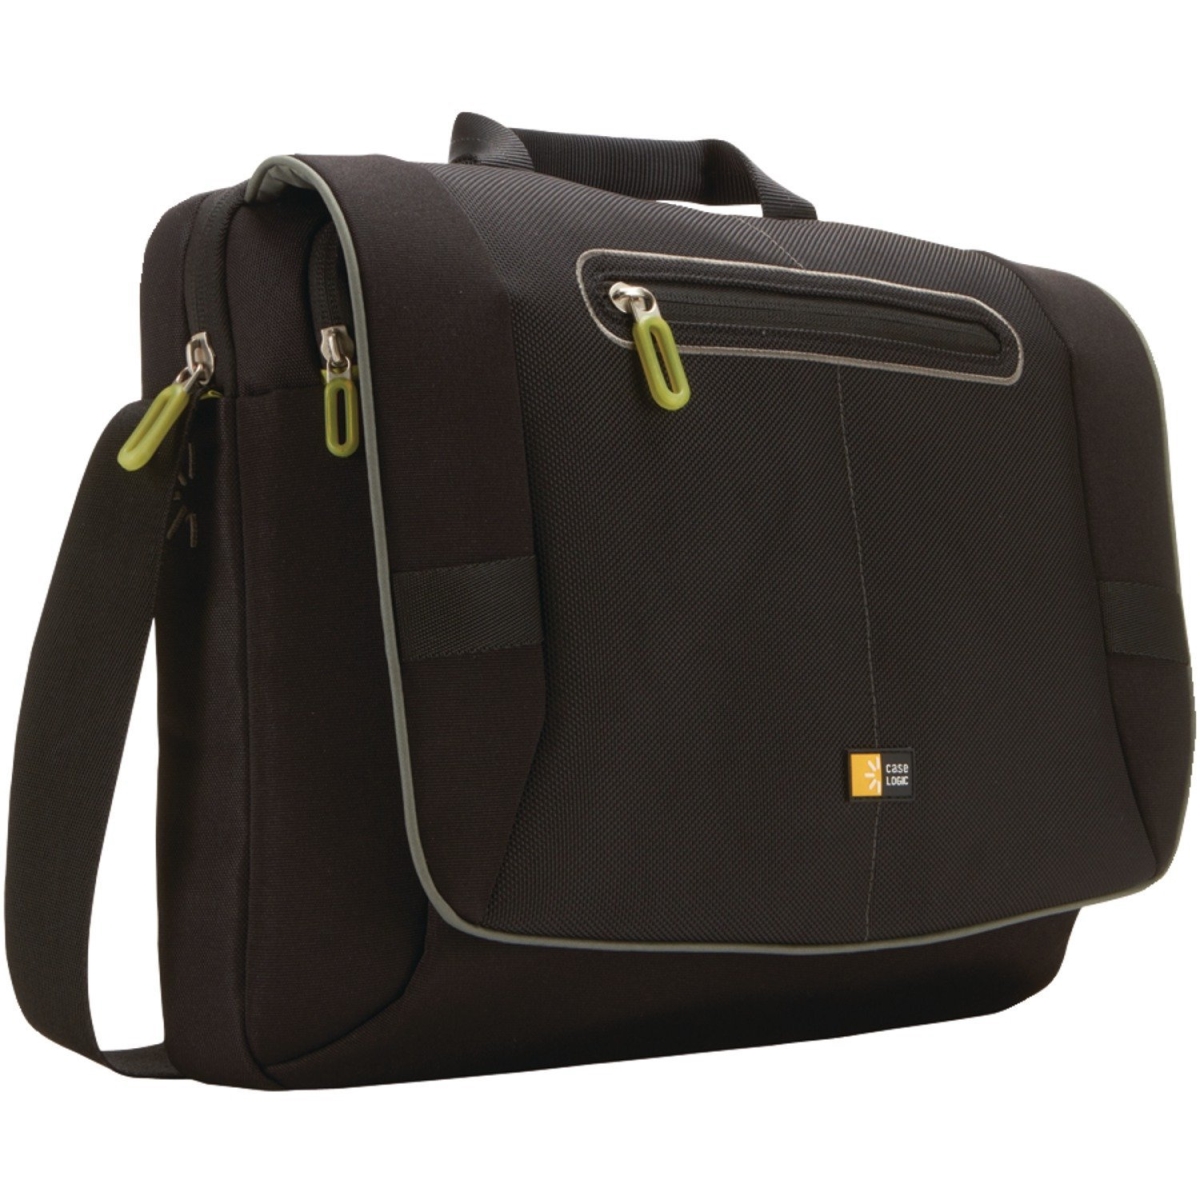 Zm5914 Carrying Case Messenger For 17 In. Notebook, Ipod - Black